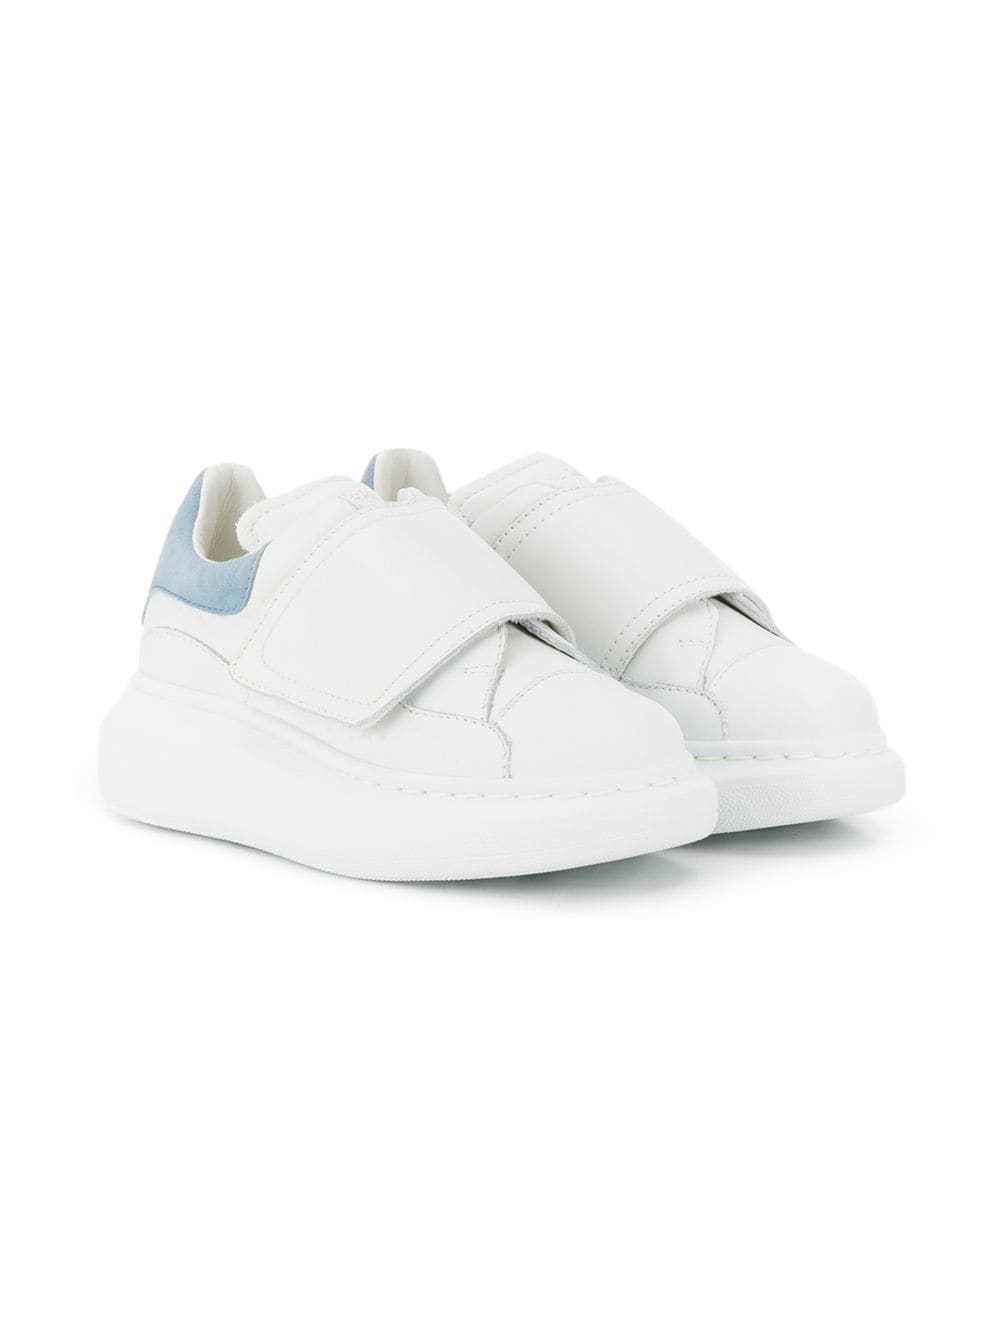 ALEXANDER KIDS Unisex Kid White Oversize Sneakers With Pastel Blue Spoiler | SHOPenauer